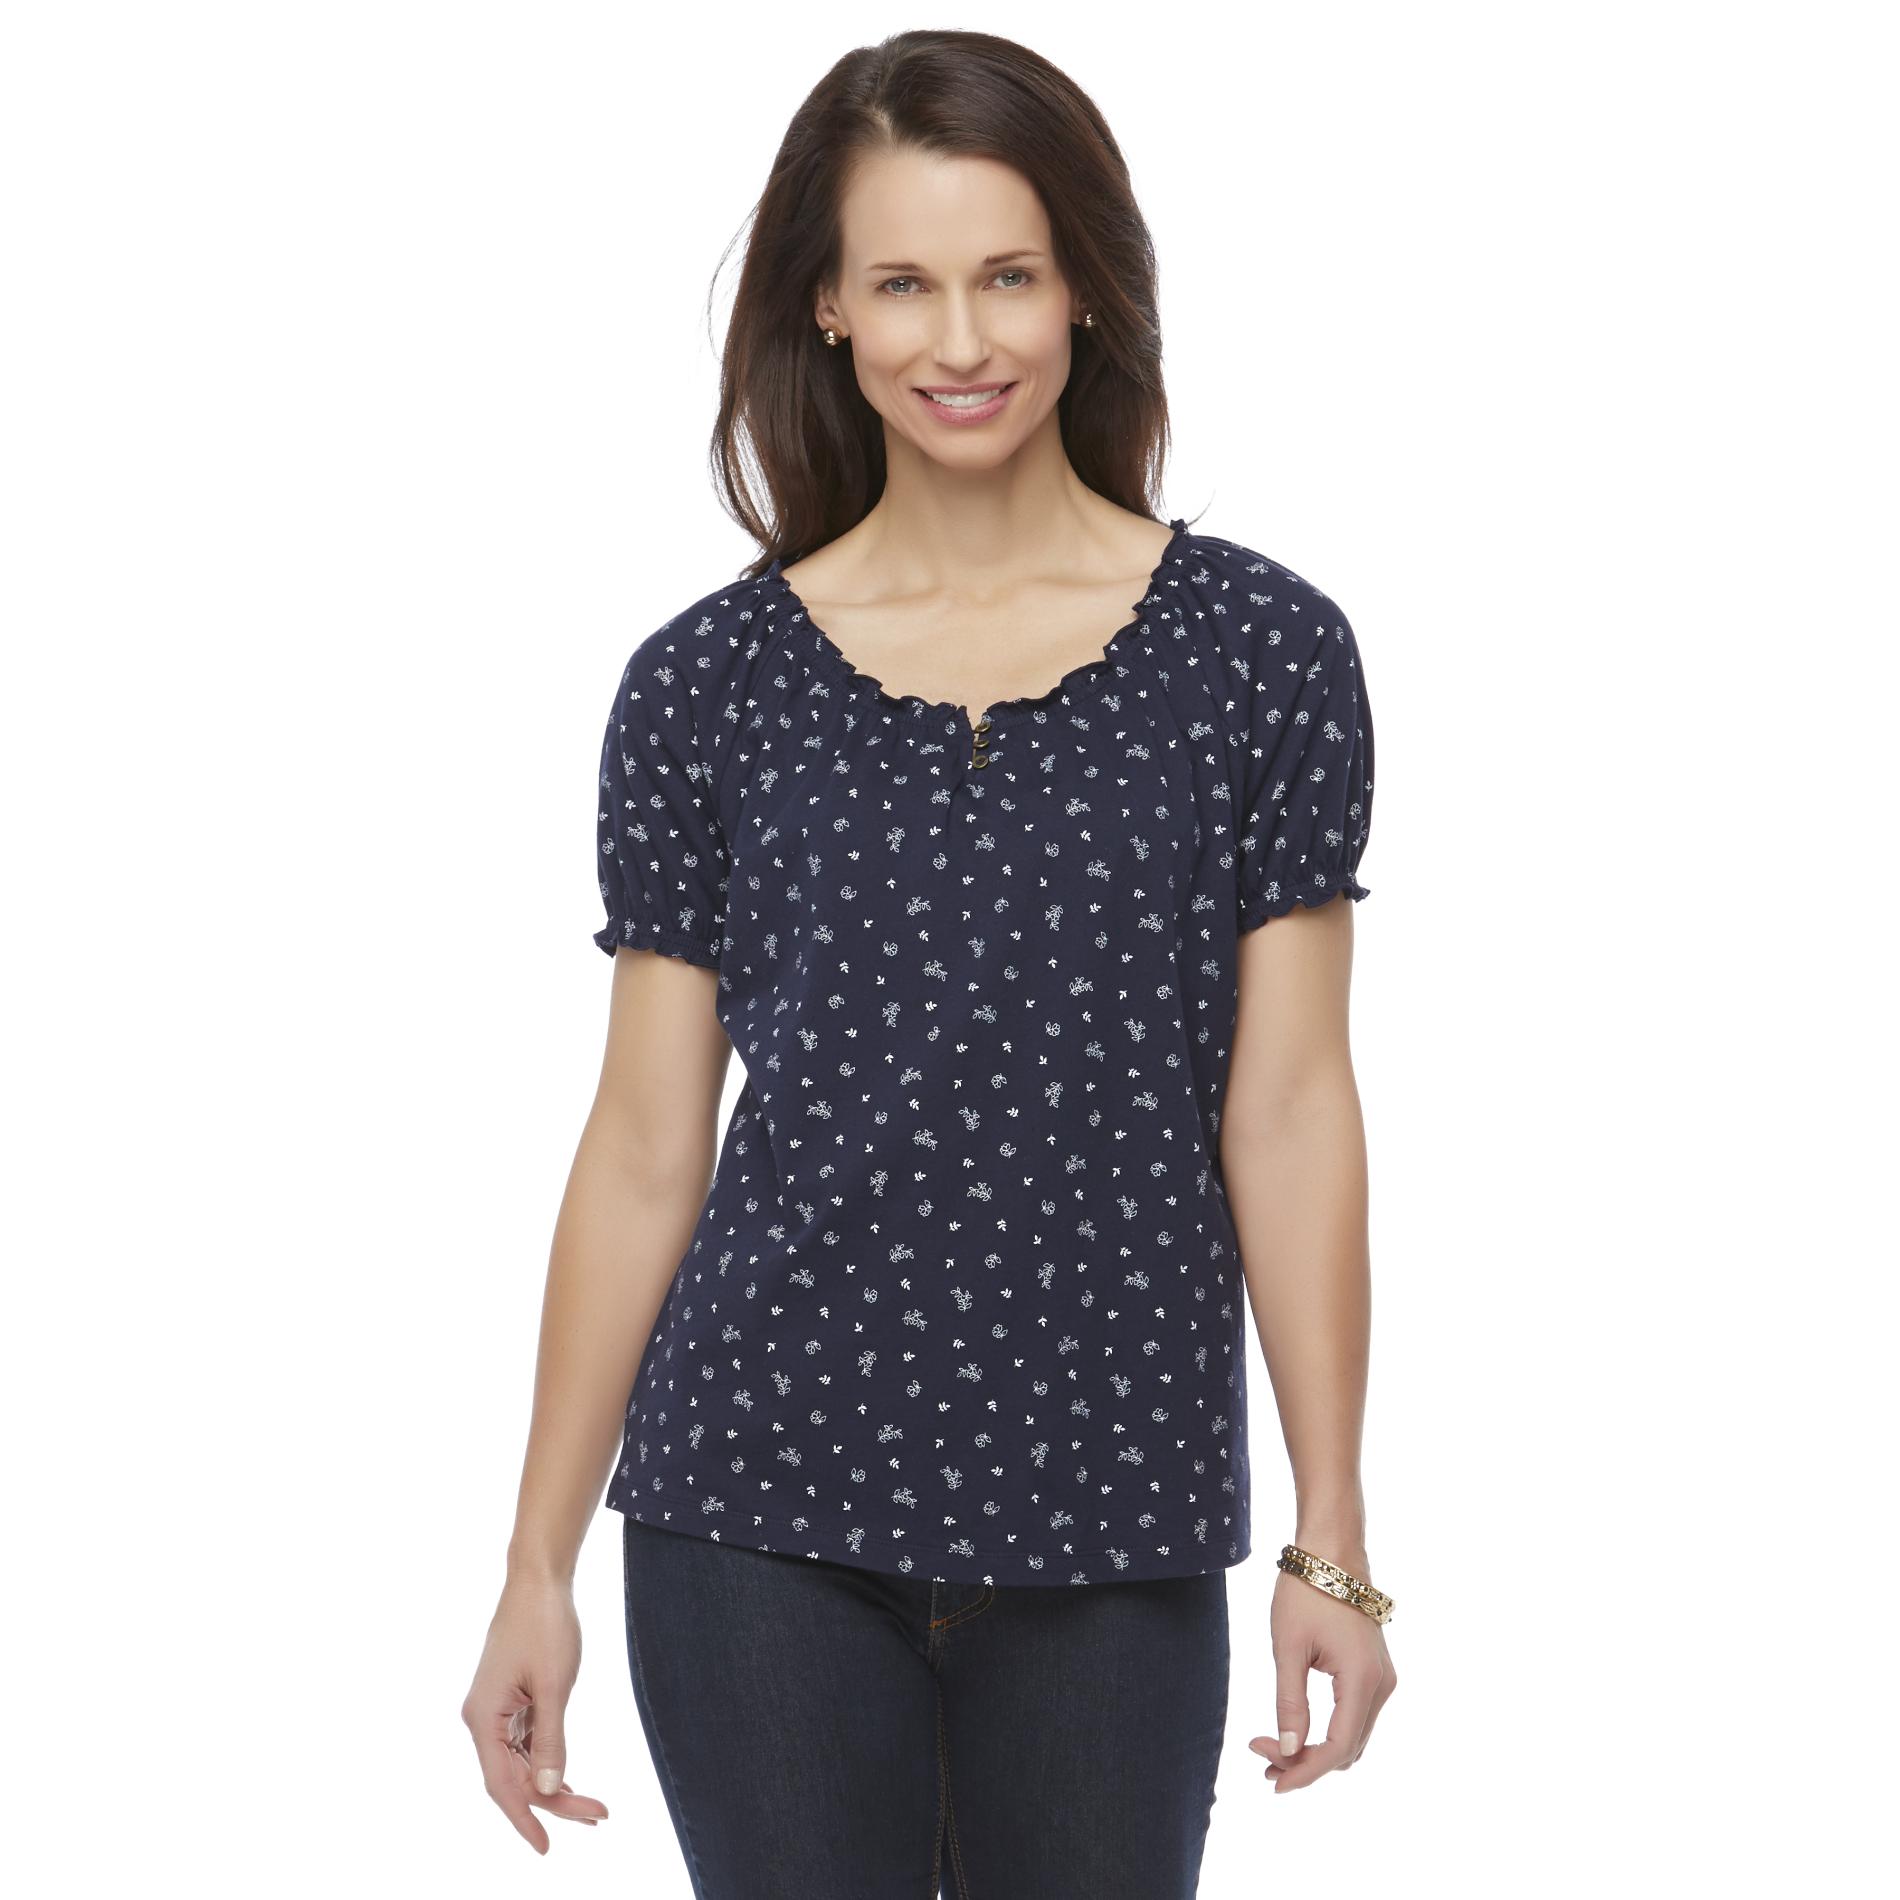 Basic Editions Women's Knit Peasant Top - Floral